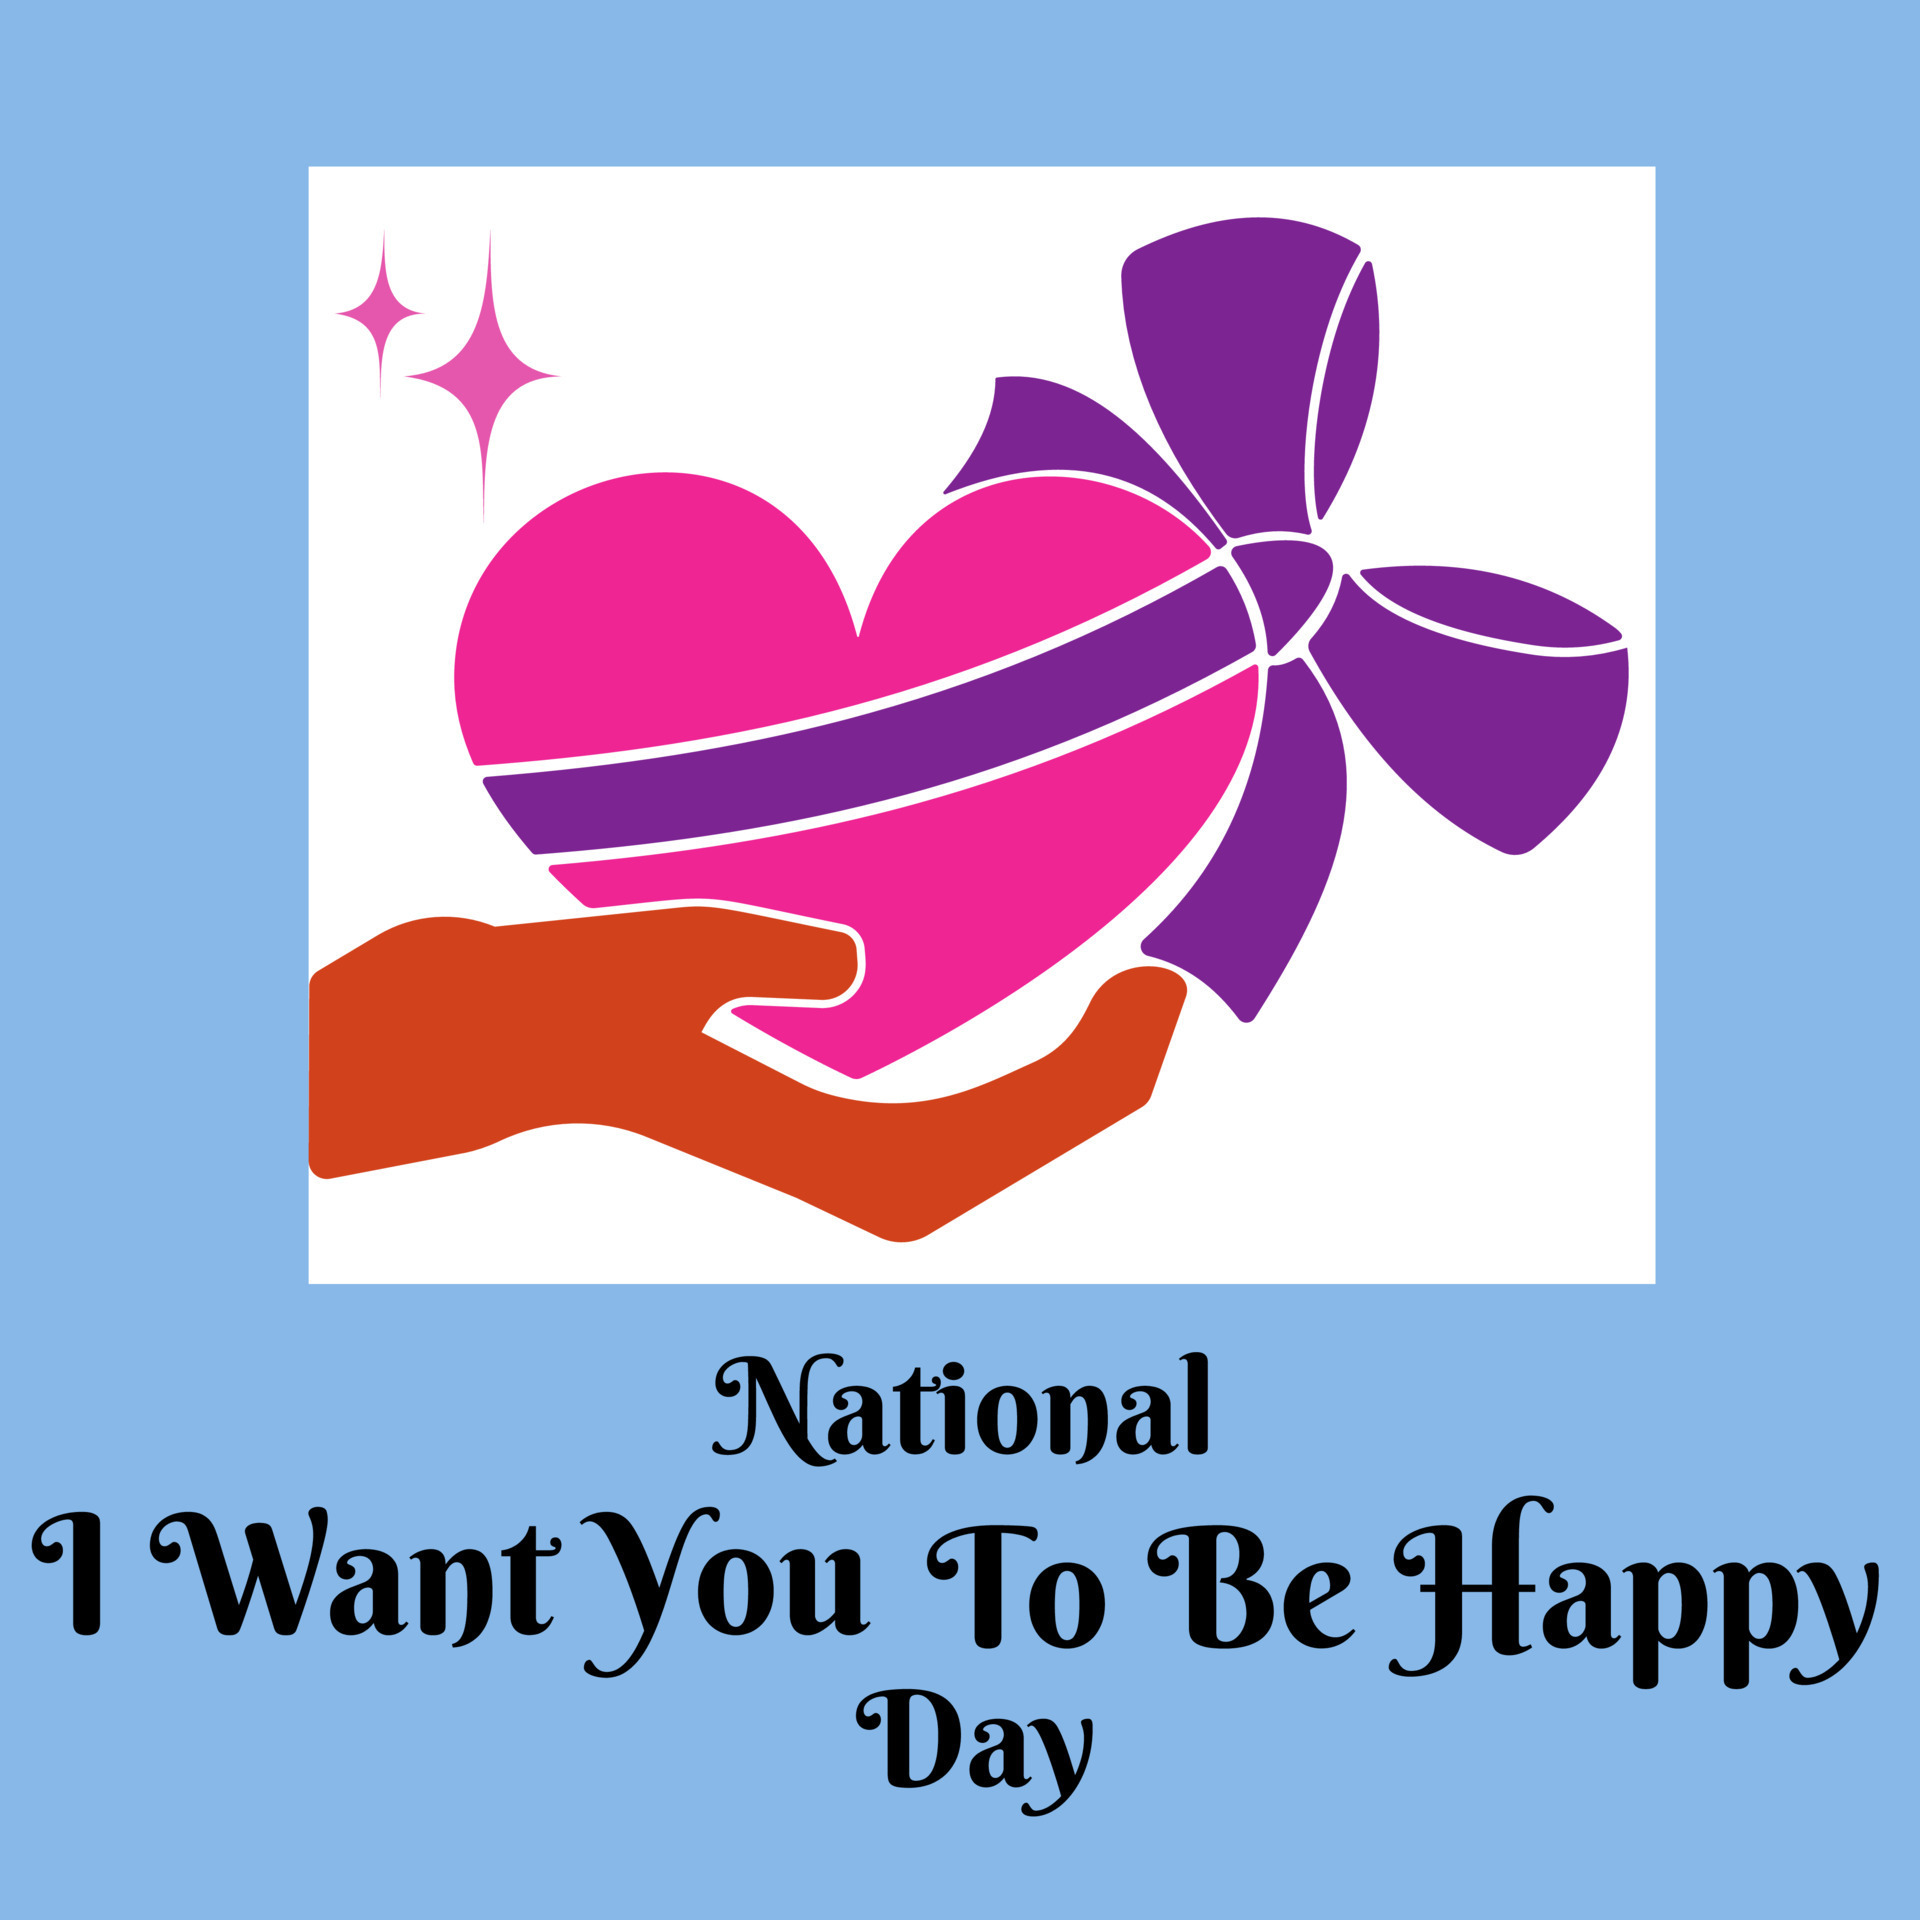 National I Want You To Be Happy Day, theme design idea 23232797 Vector